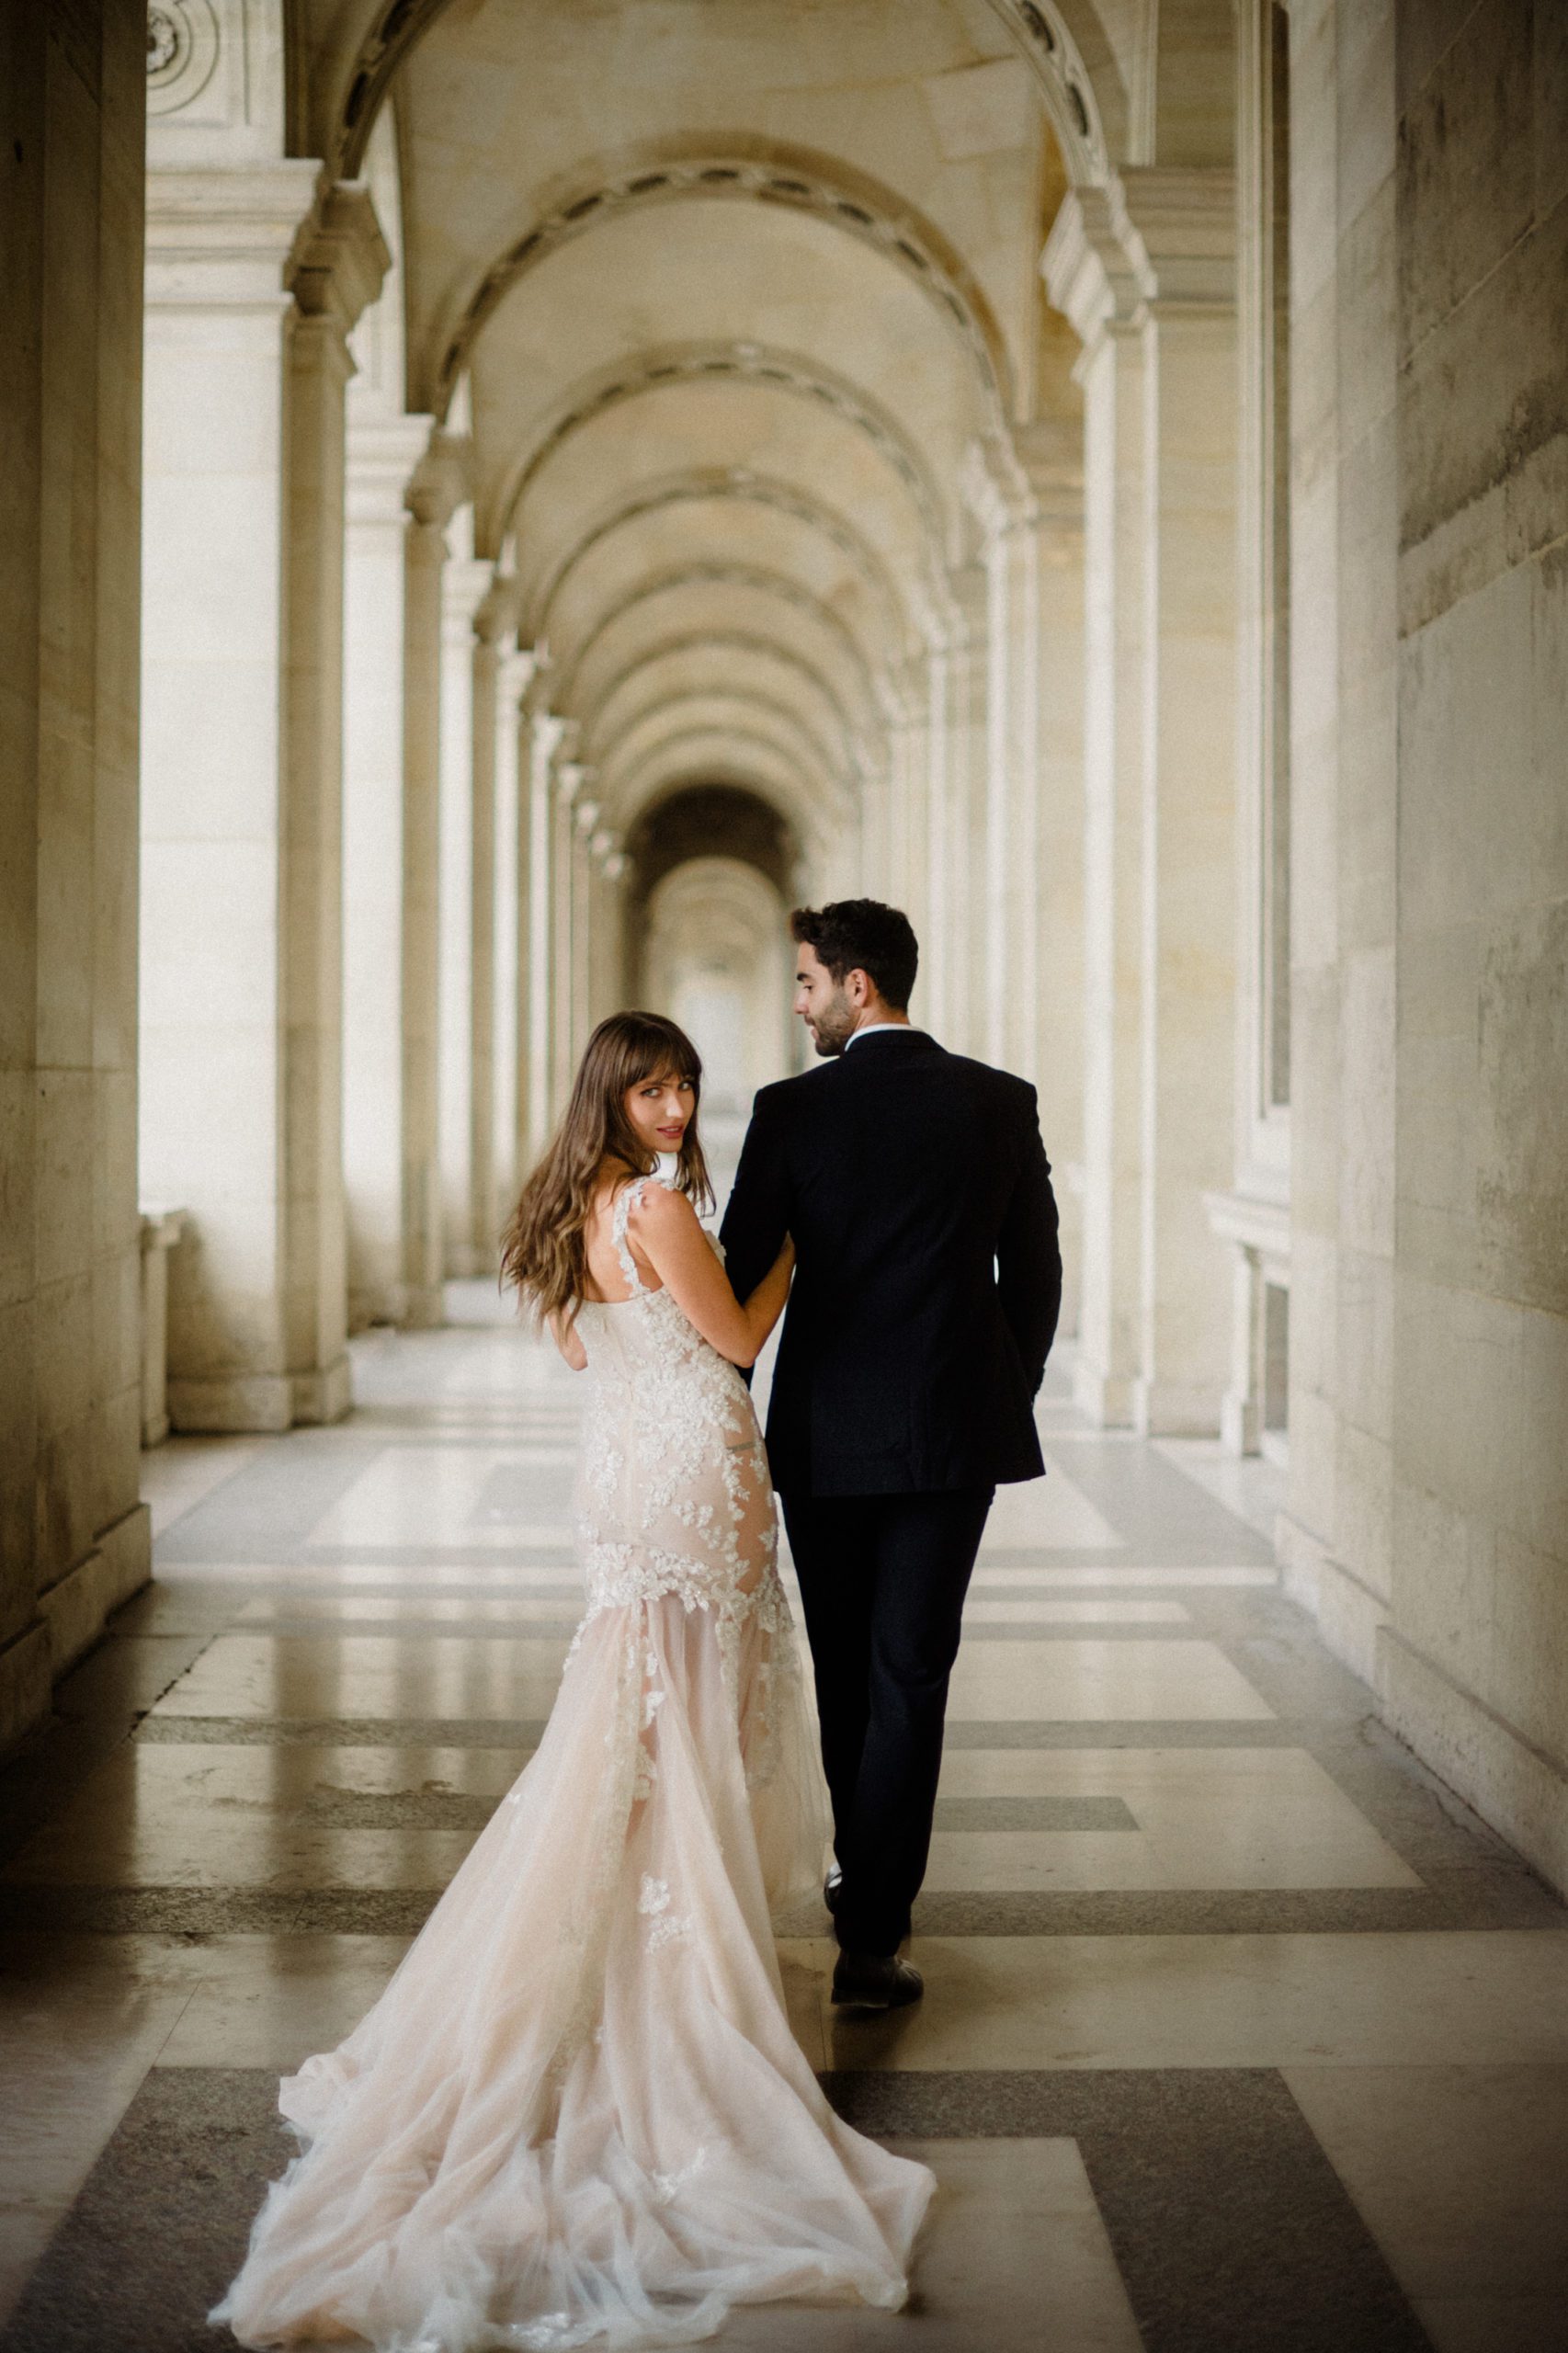 Plan your Paris elopement (or in your own country with Paris vibes!) check out our styled shoot for Paris elopement inspiration!